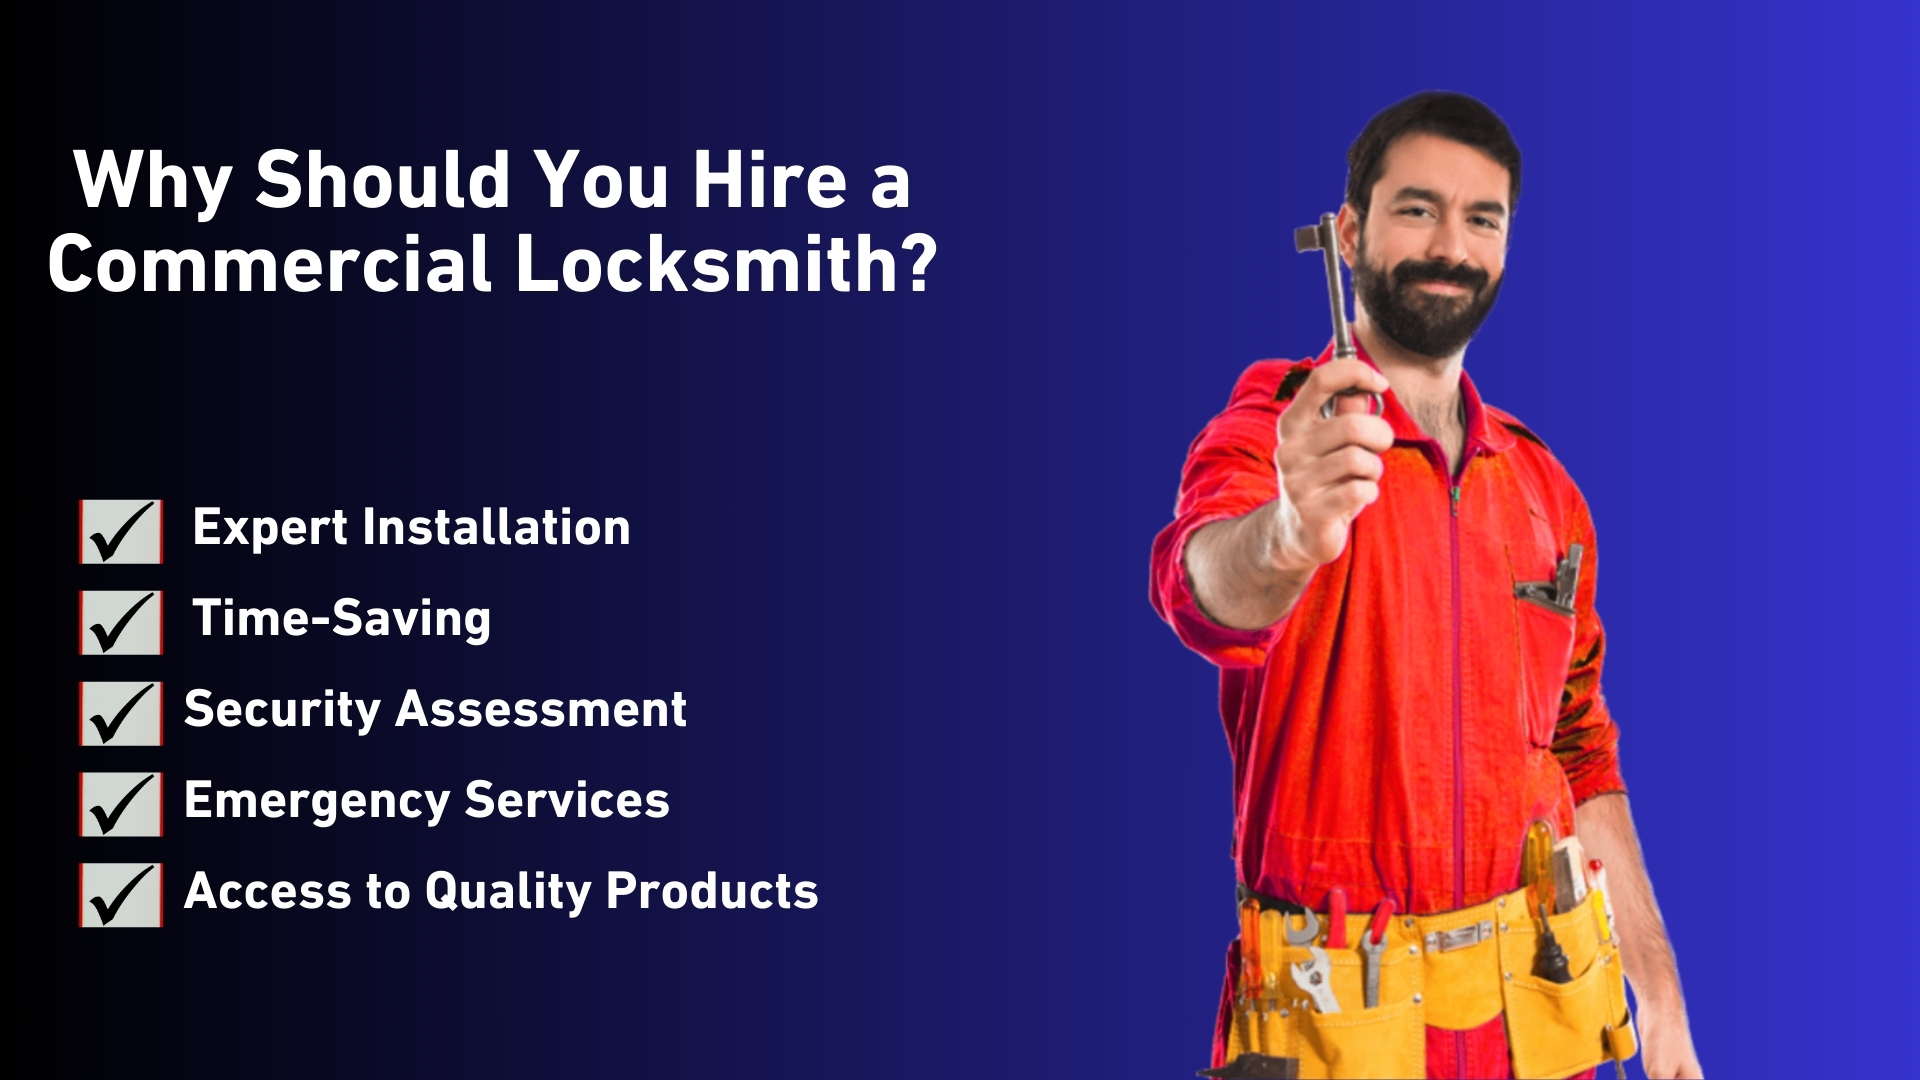 Reasons why you should hire a commercial locksmith when installing deadlatches